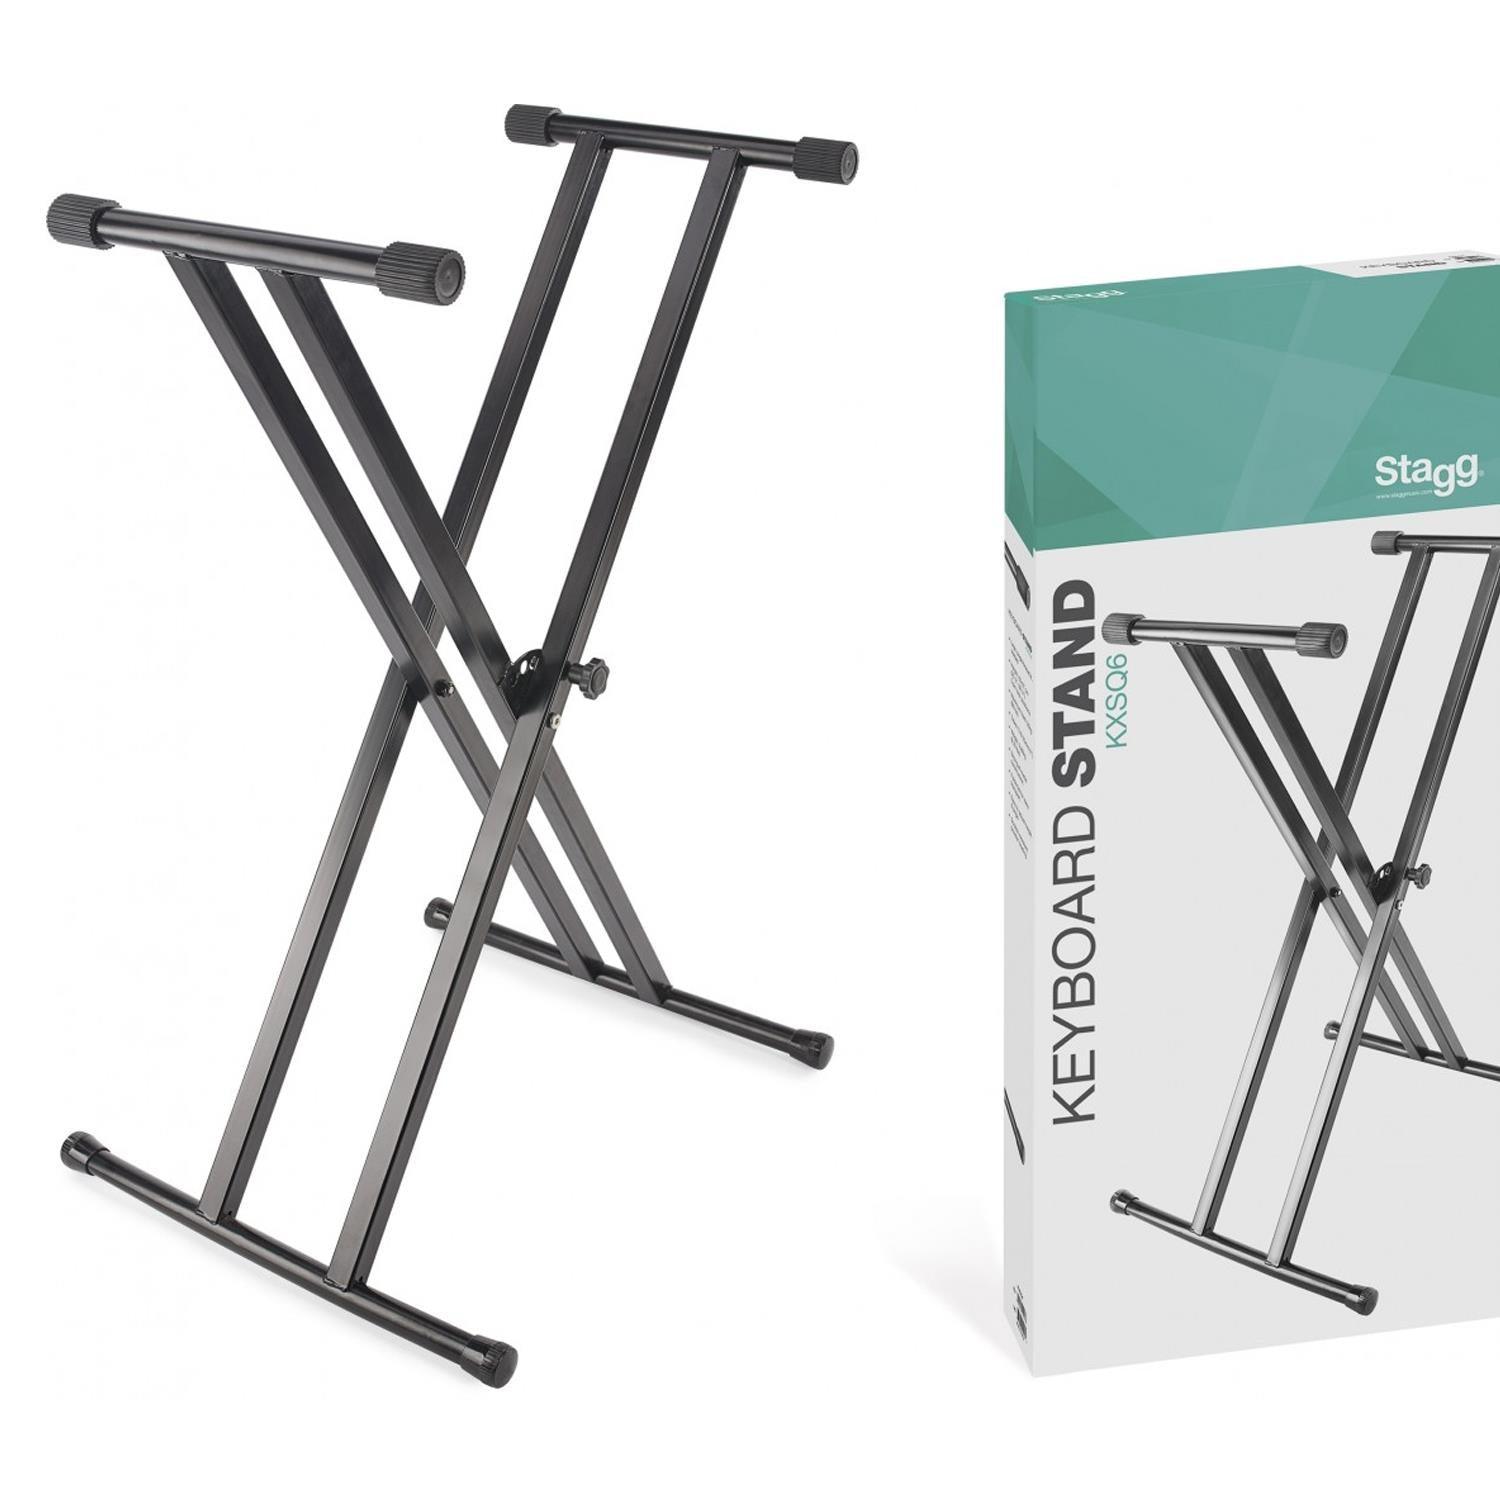 Stagg KXSQ6 Double X Welded Keyboard Stand - DY Pro Audio